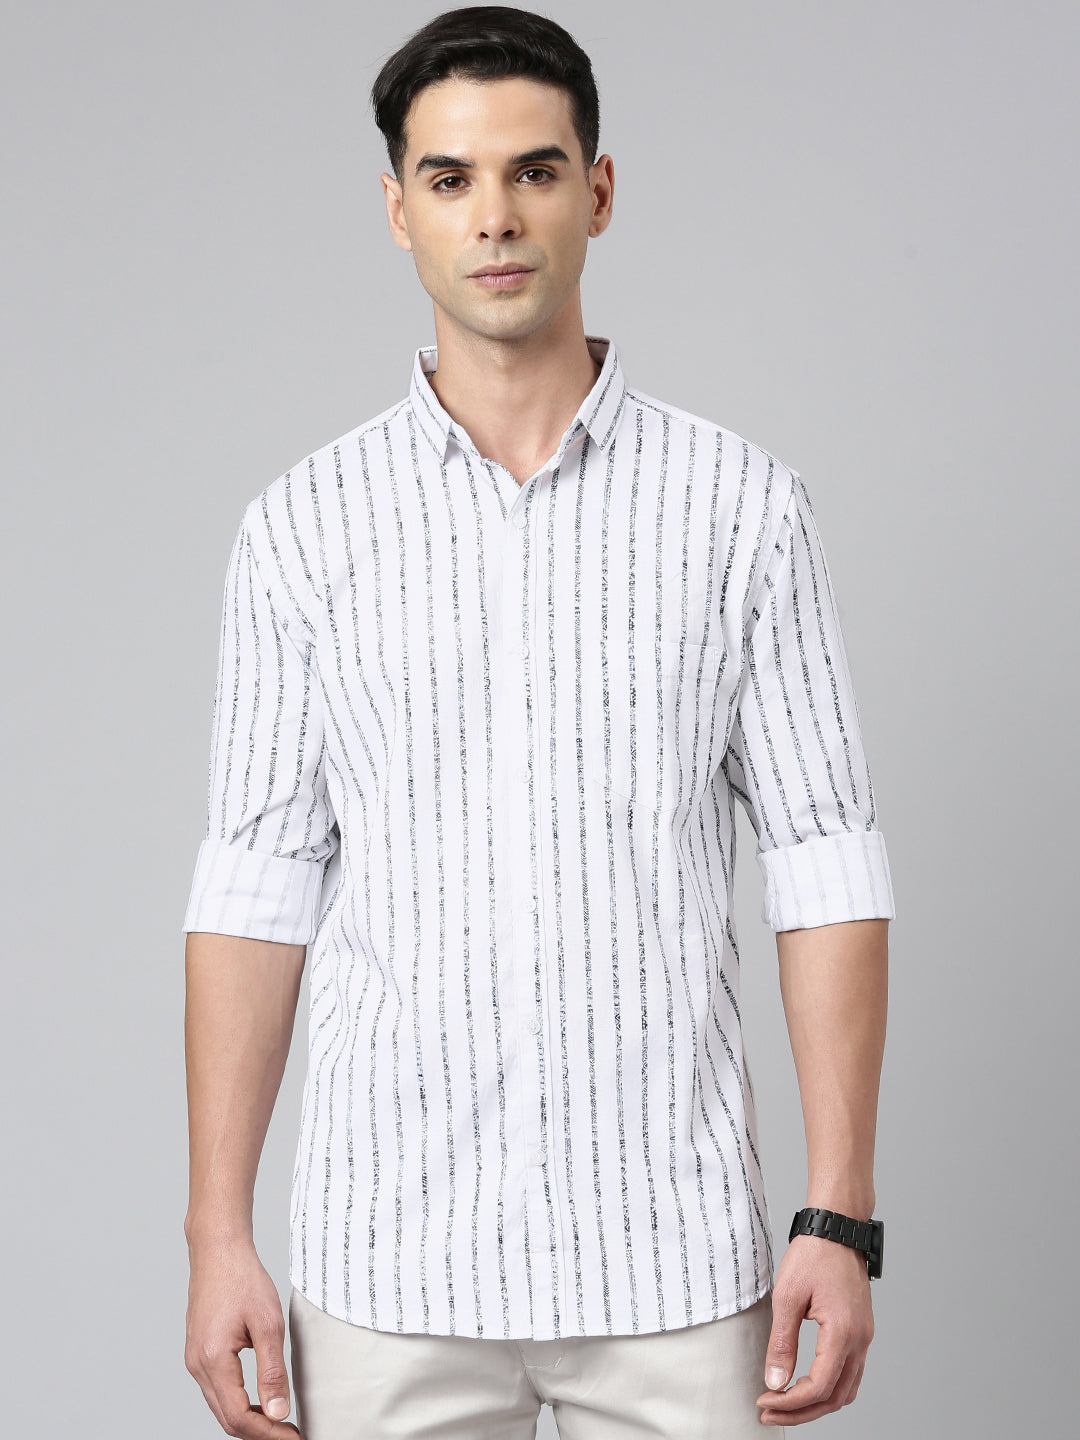 Majestic Man Casual Comfortable Slim Fit Stripped Cotton Shirt - White